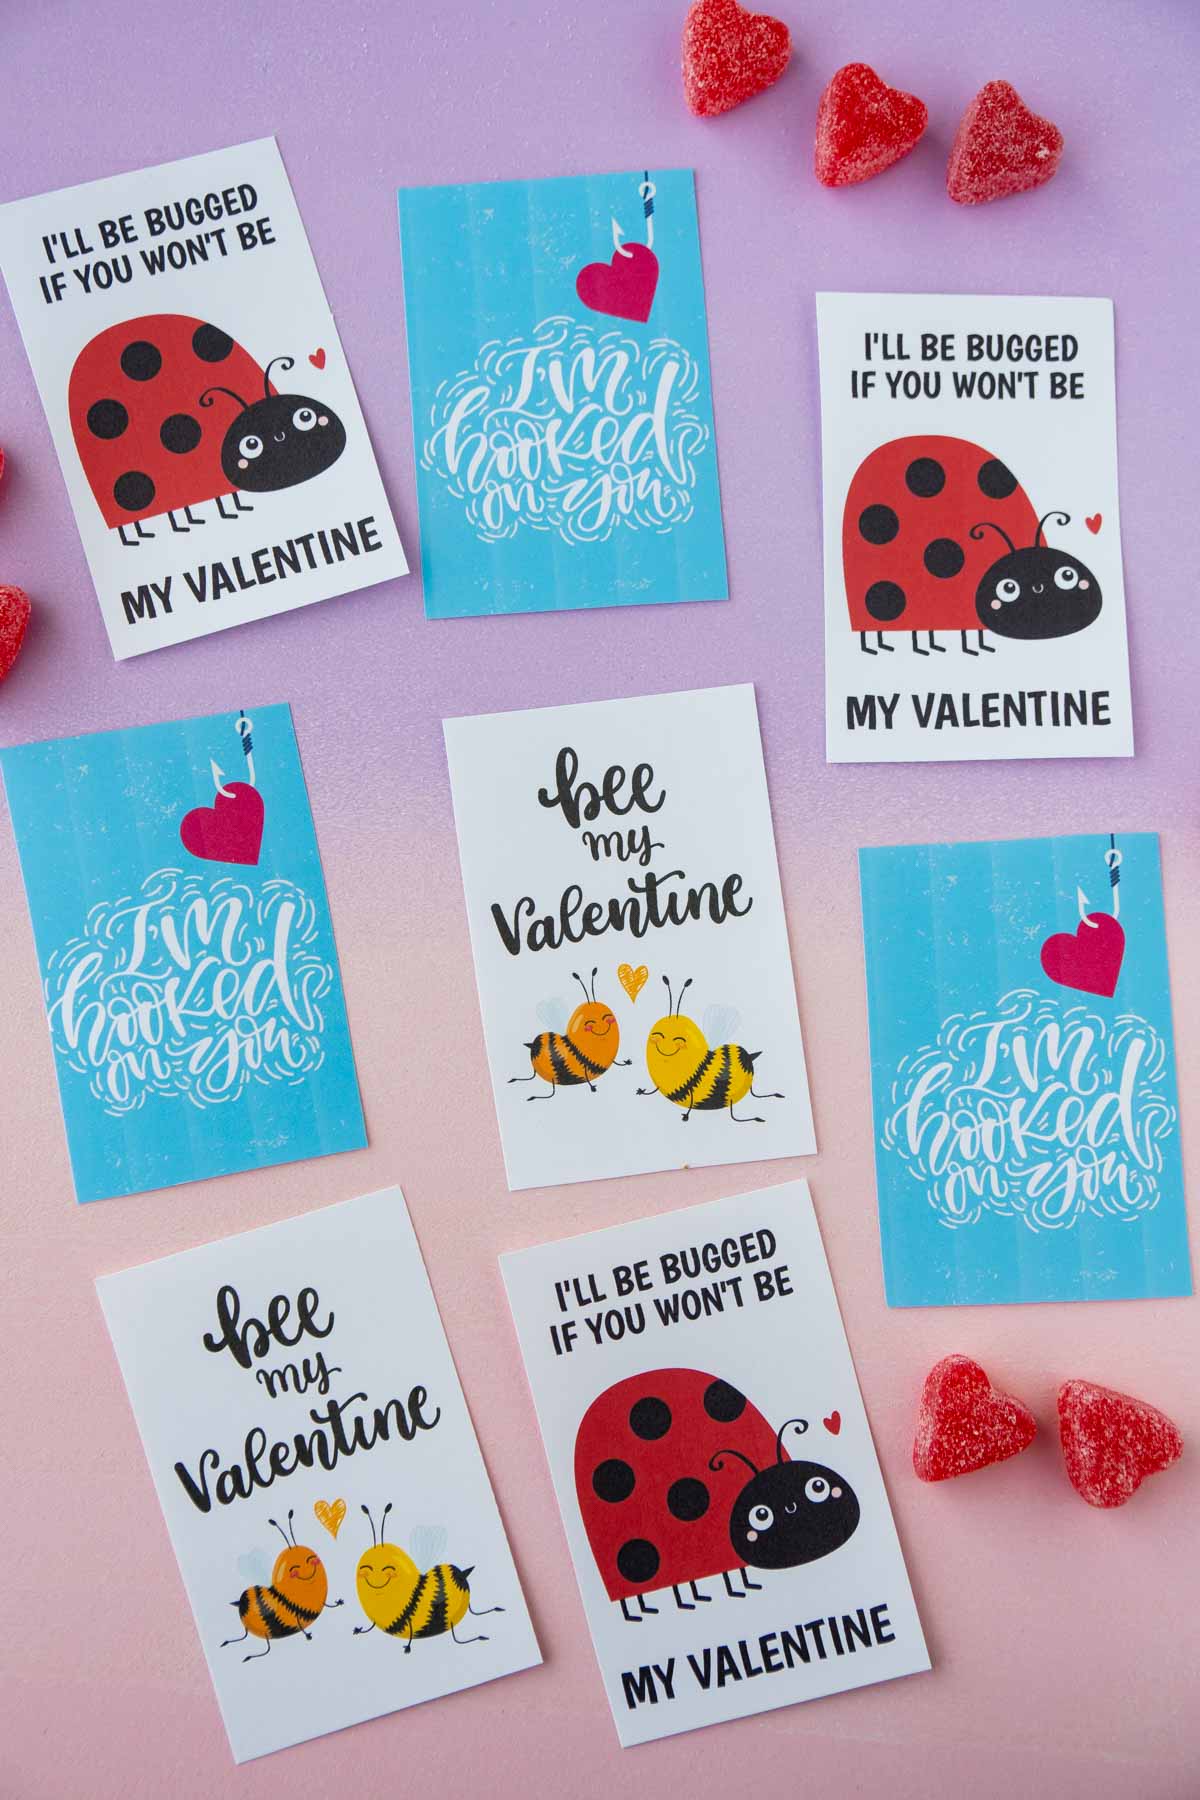 printed out bee mine valentine cards